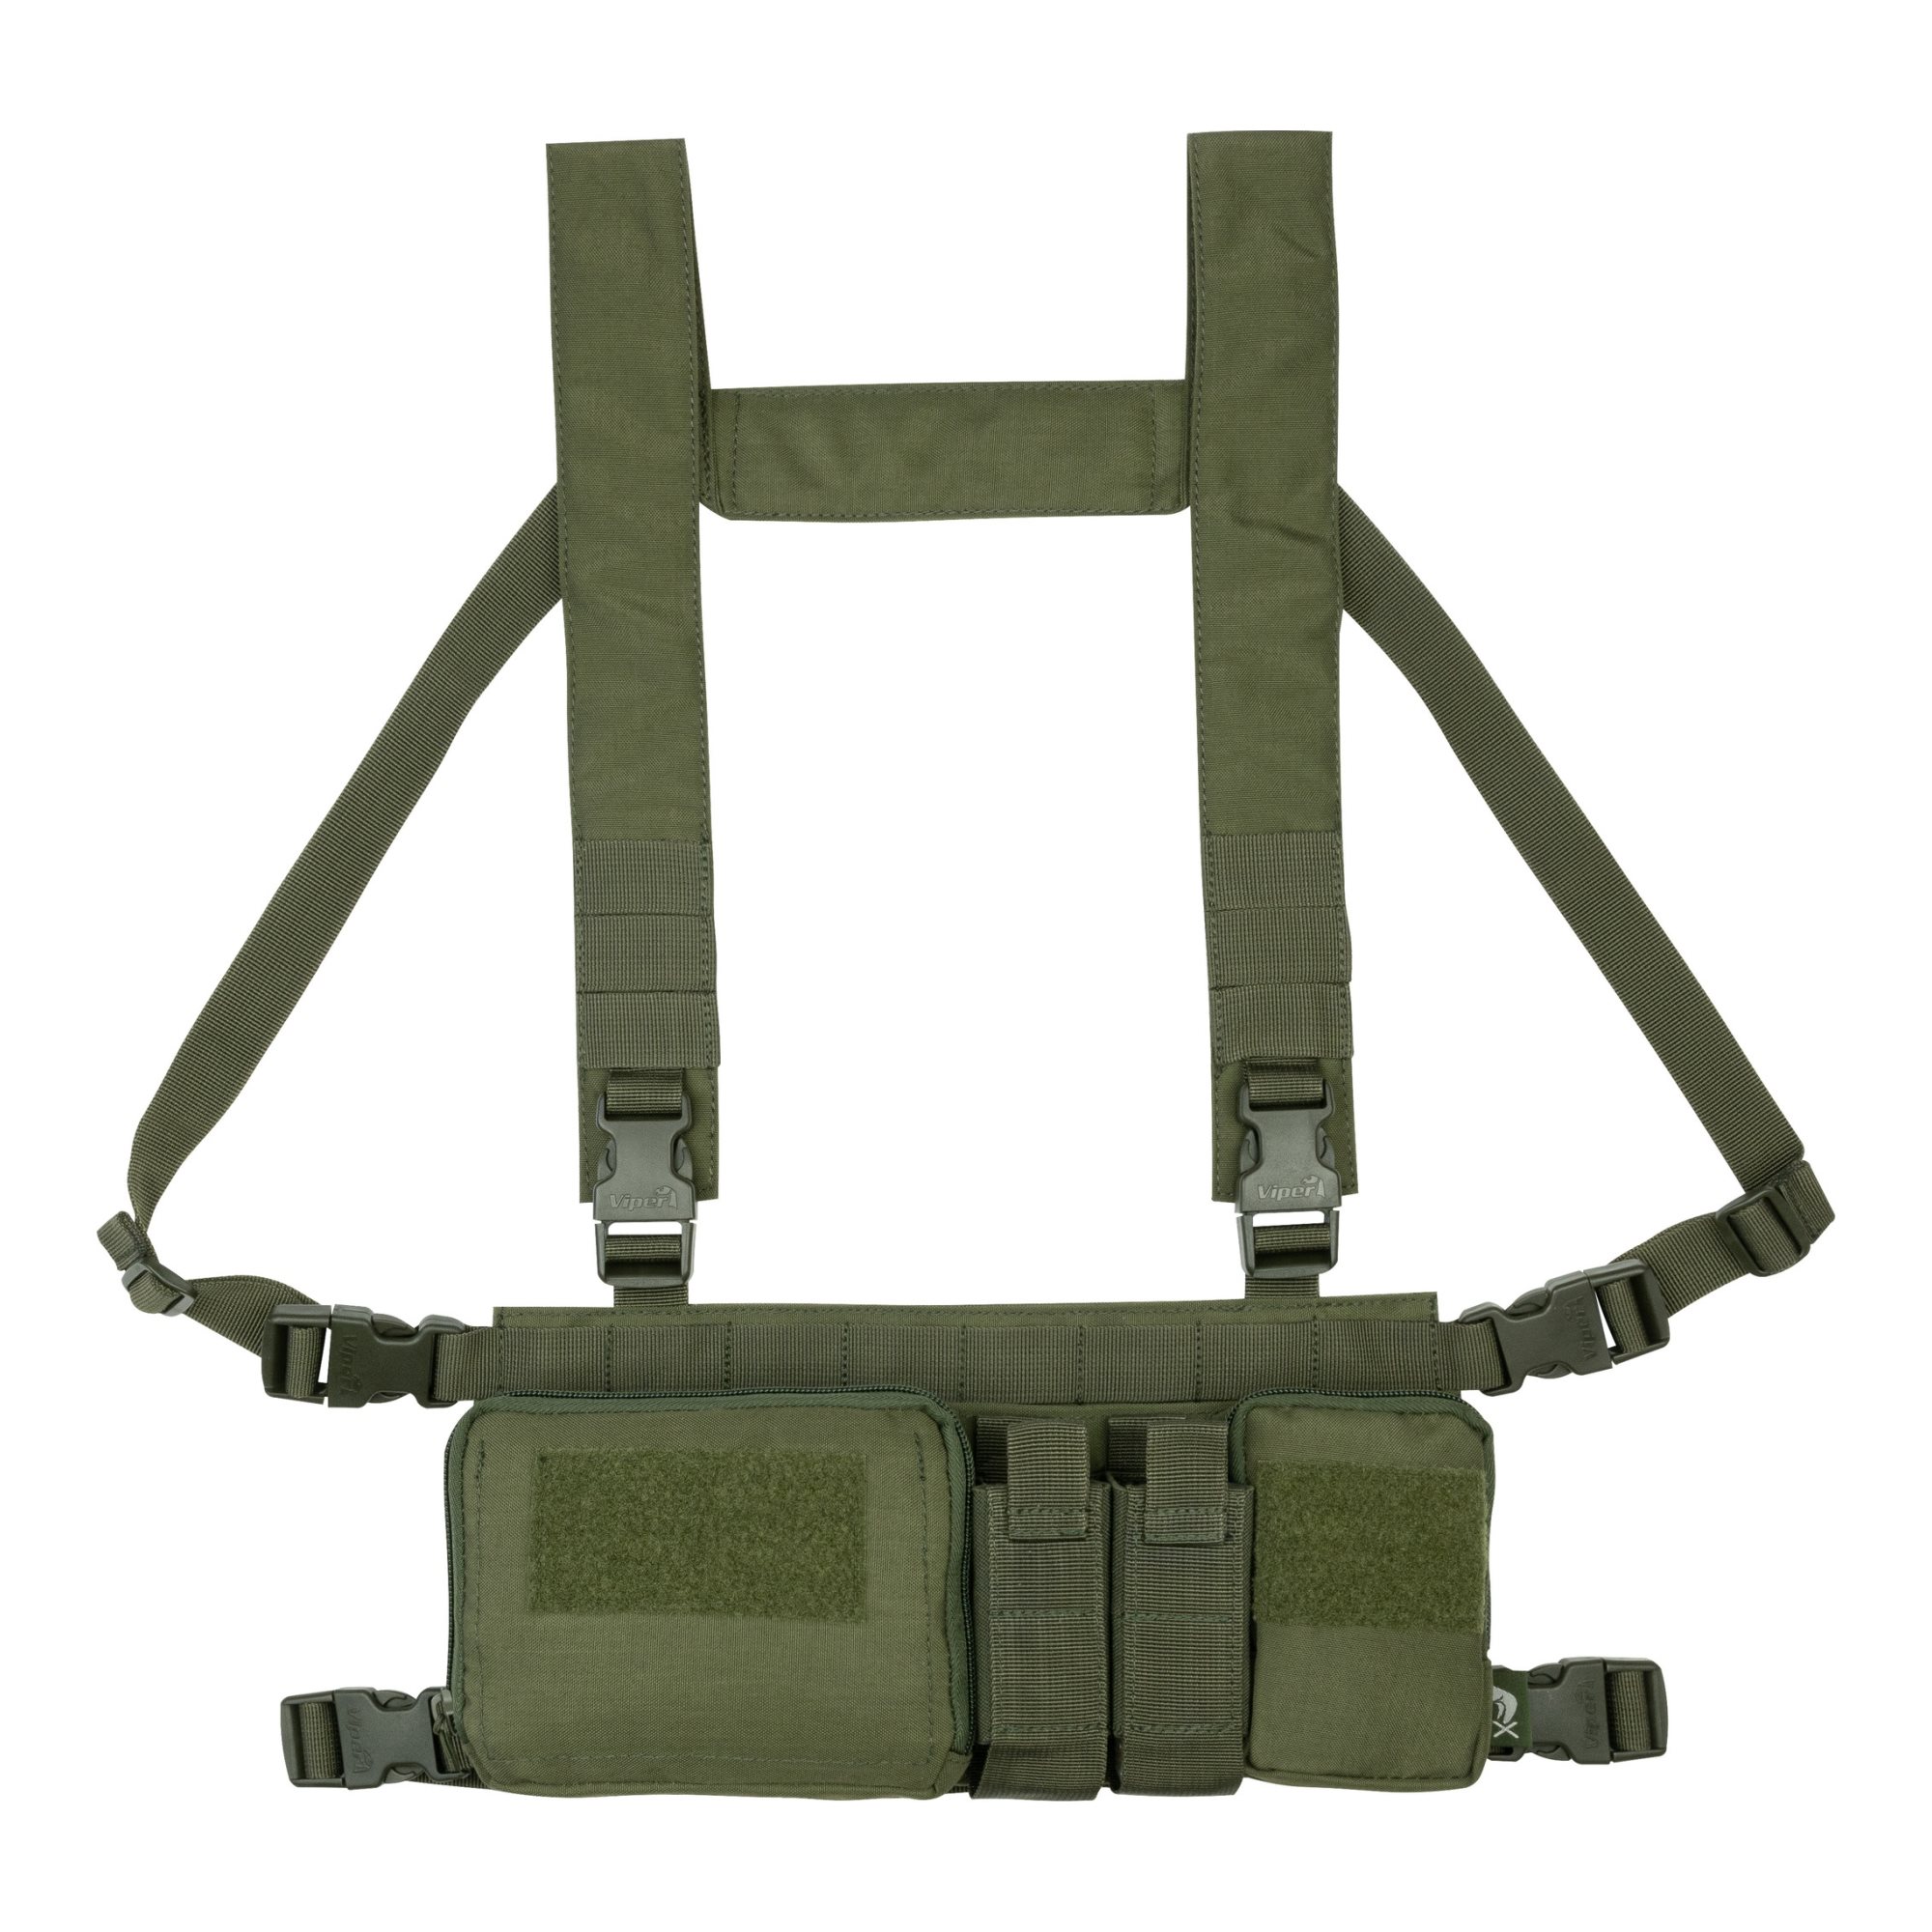 VIPER TACTICAL VX BUCKLE UP UTILITY CHEST RIG QUICK RELEASE VEST AIRSOFT ARMY 